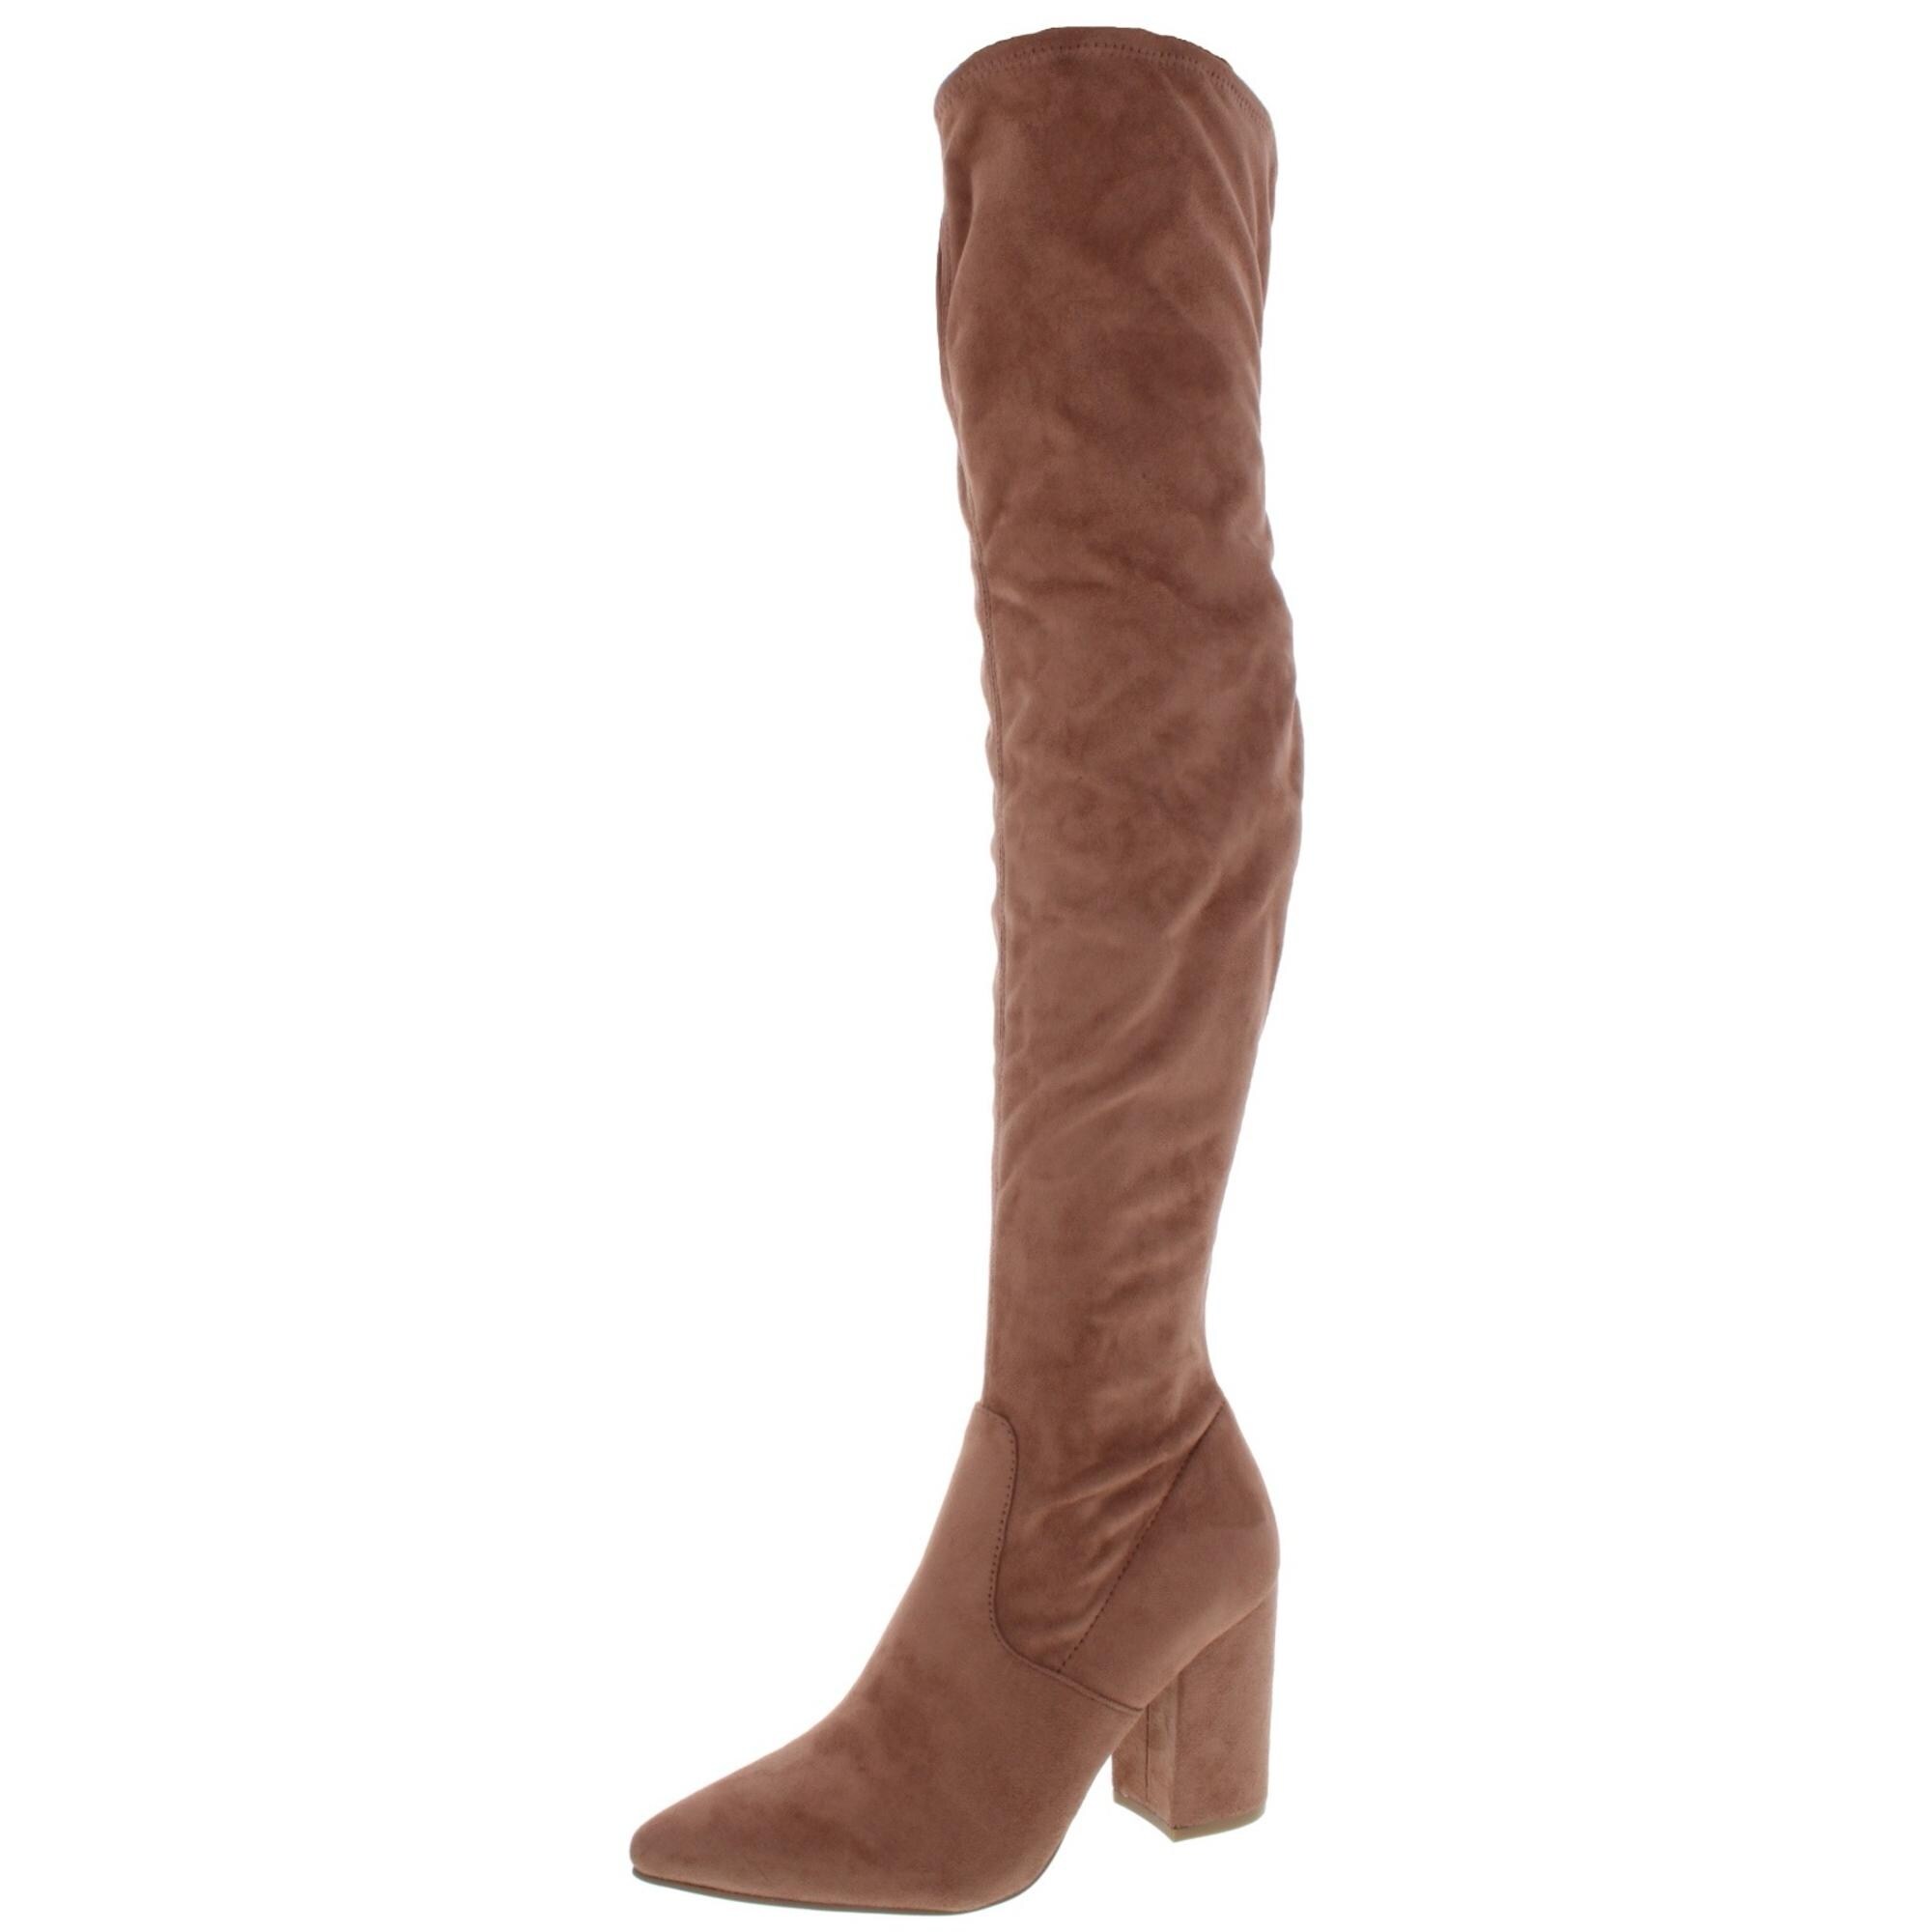 steve madden over the knee suede boots